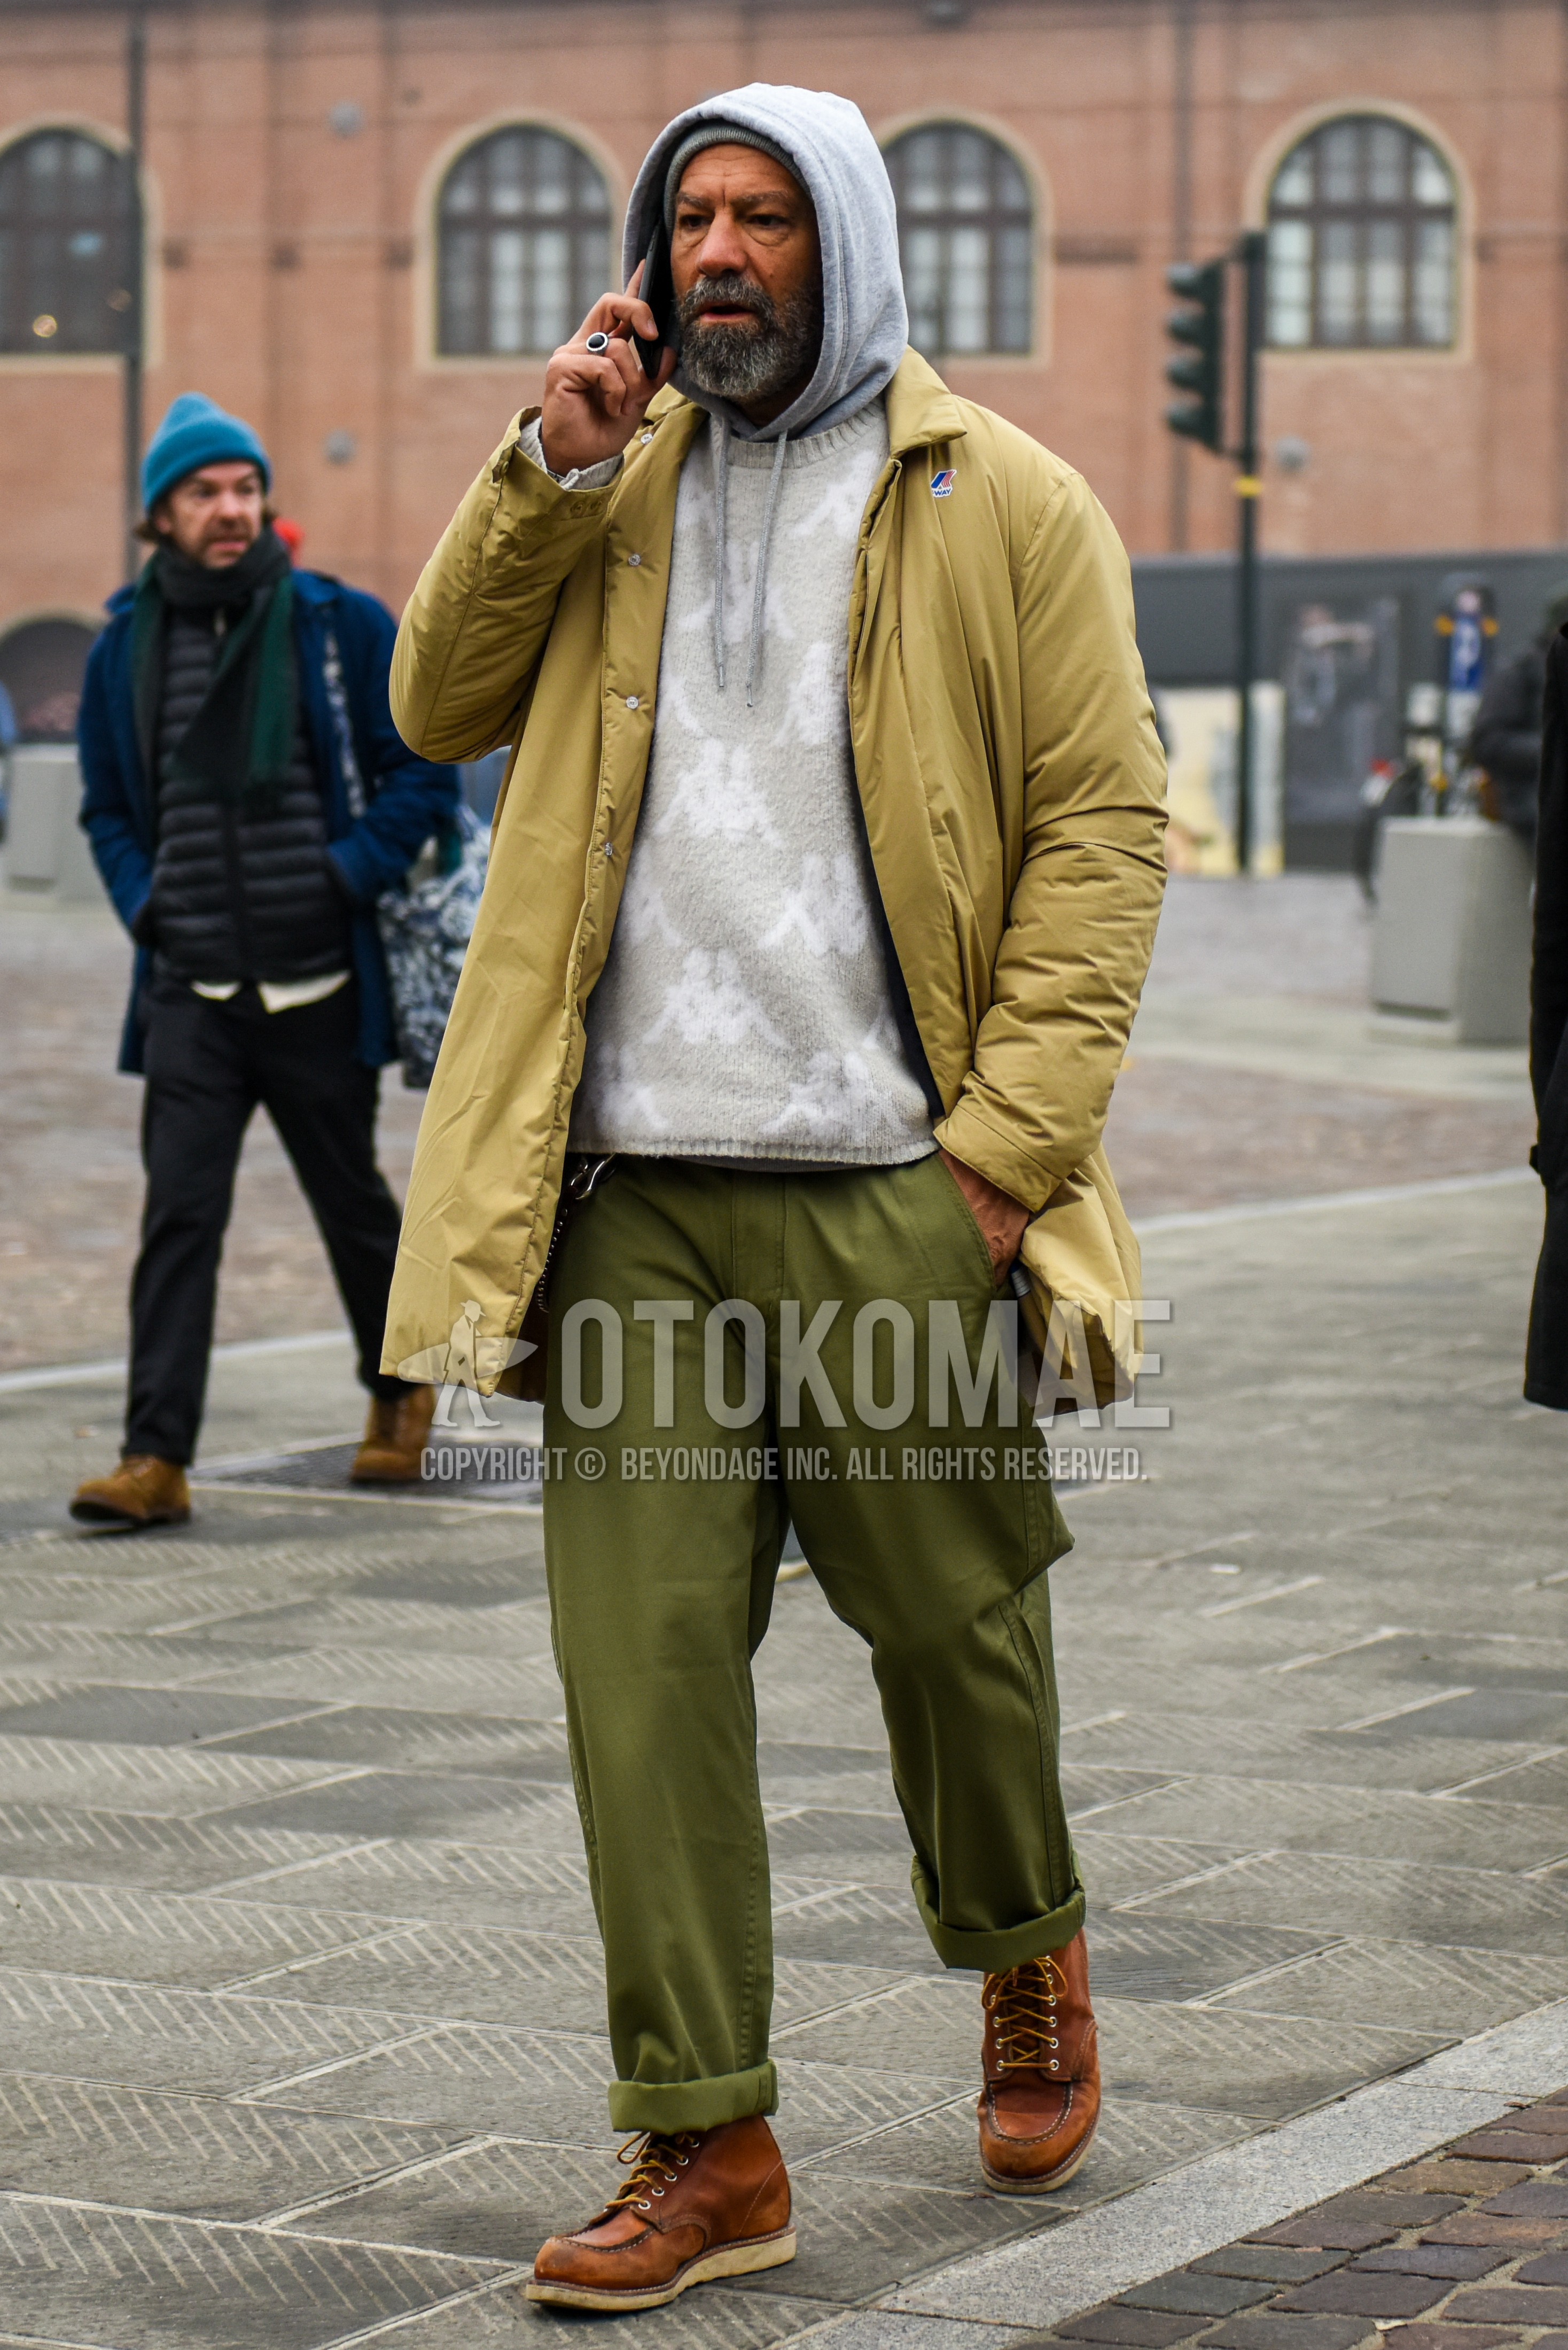 Men's winter outfit with beige plain stenkarrer coat, beige plain down jacket, gray graphic sweater, gray plain hoodie, olive green plain chinos, brown work boots.